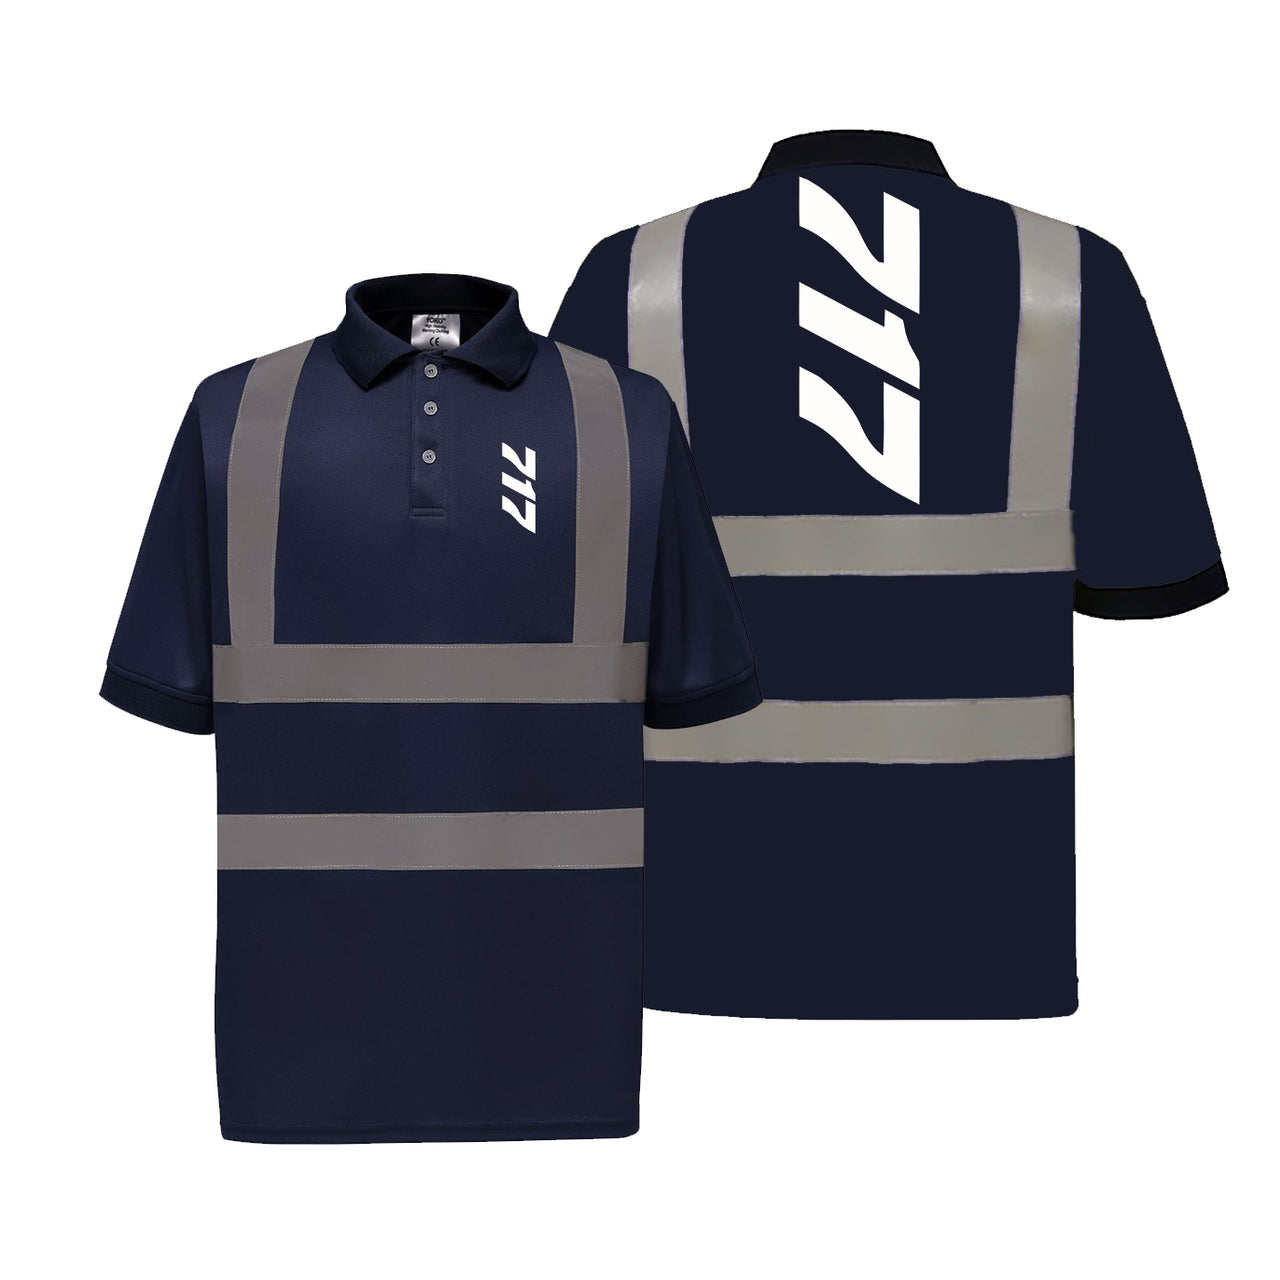 Boeing 717 Text Designed Reflective Polo T-Shirts